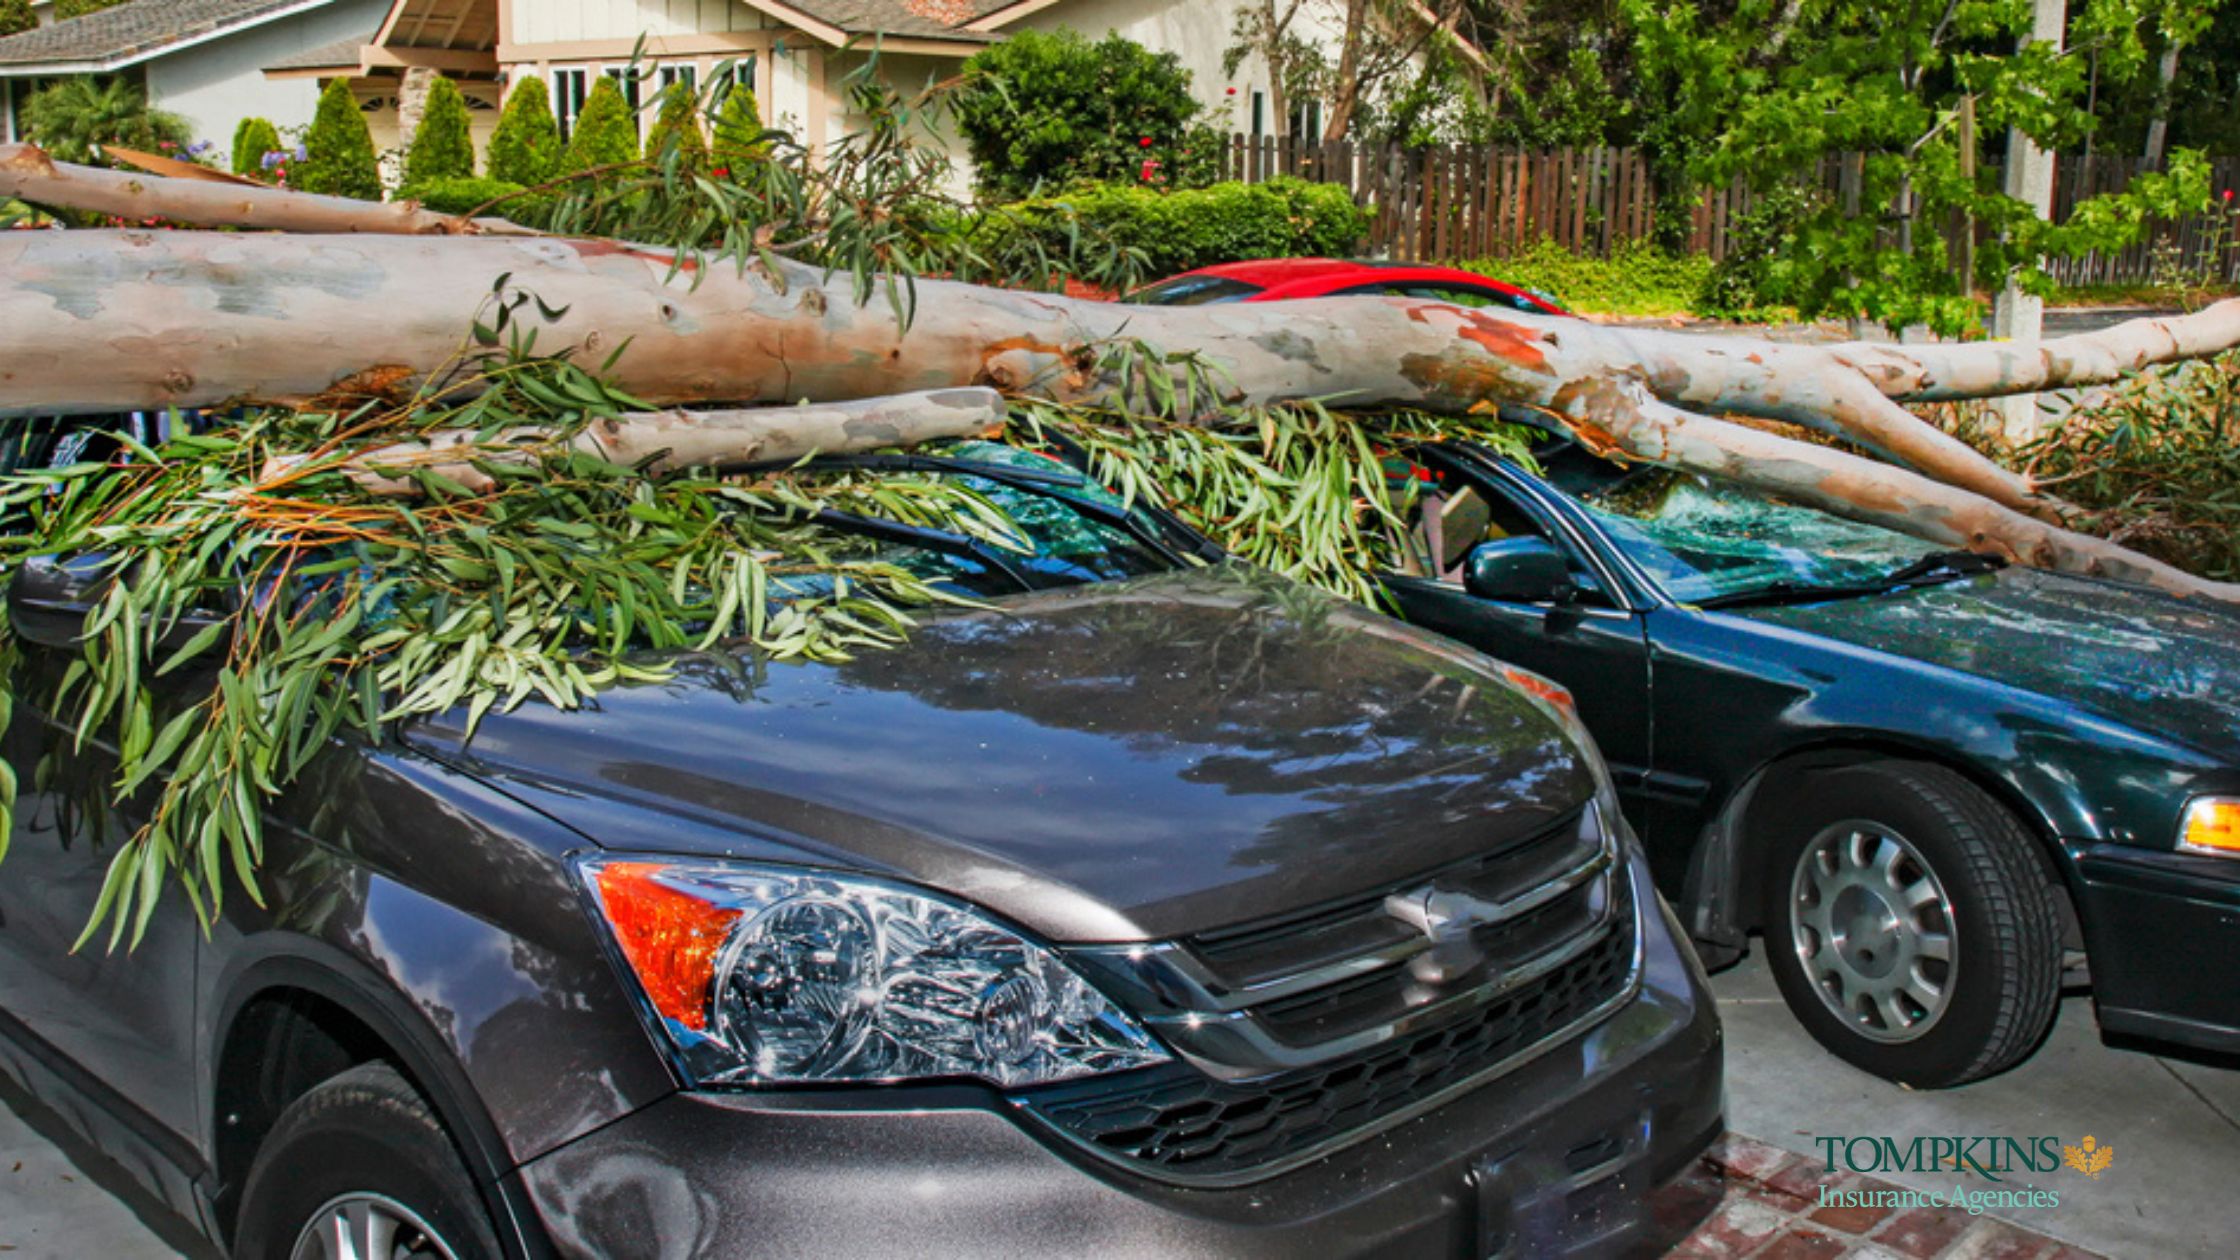 7 Things to Do While Filing an Automobile Total Loss Claim